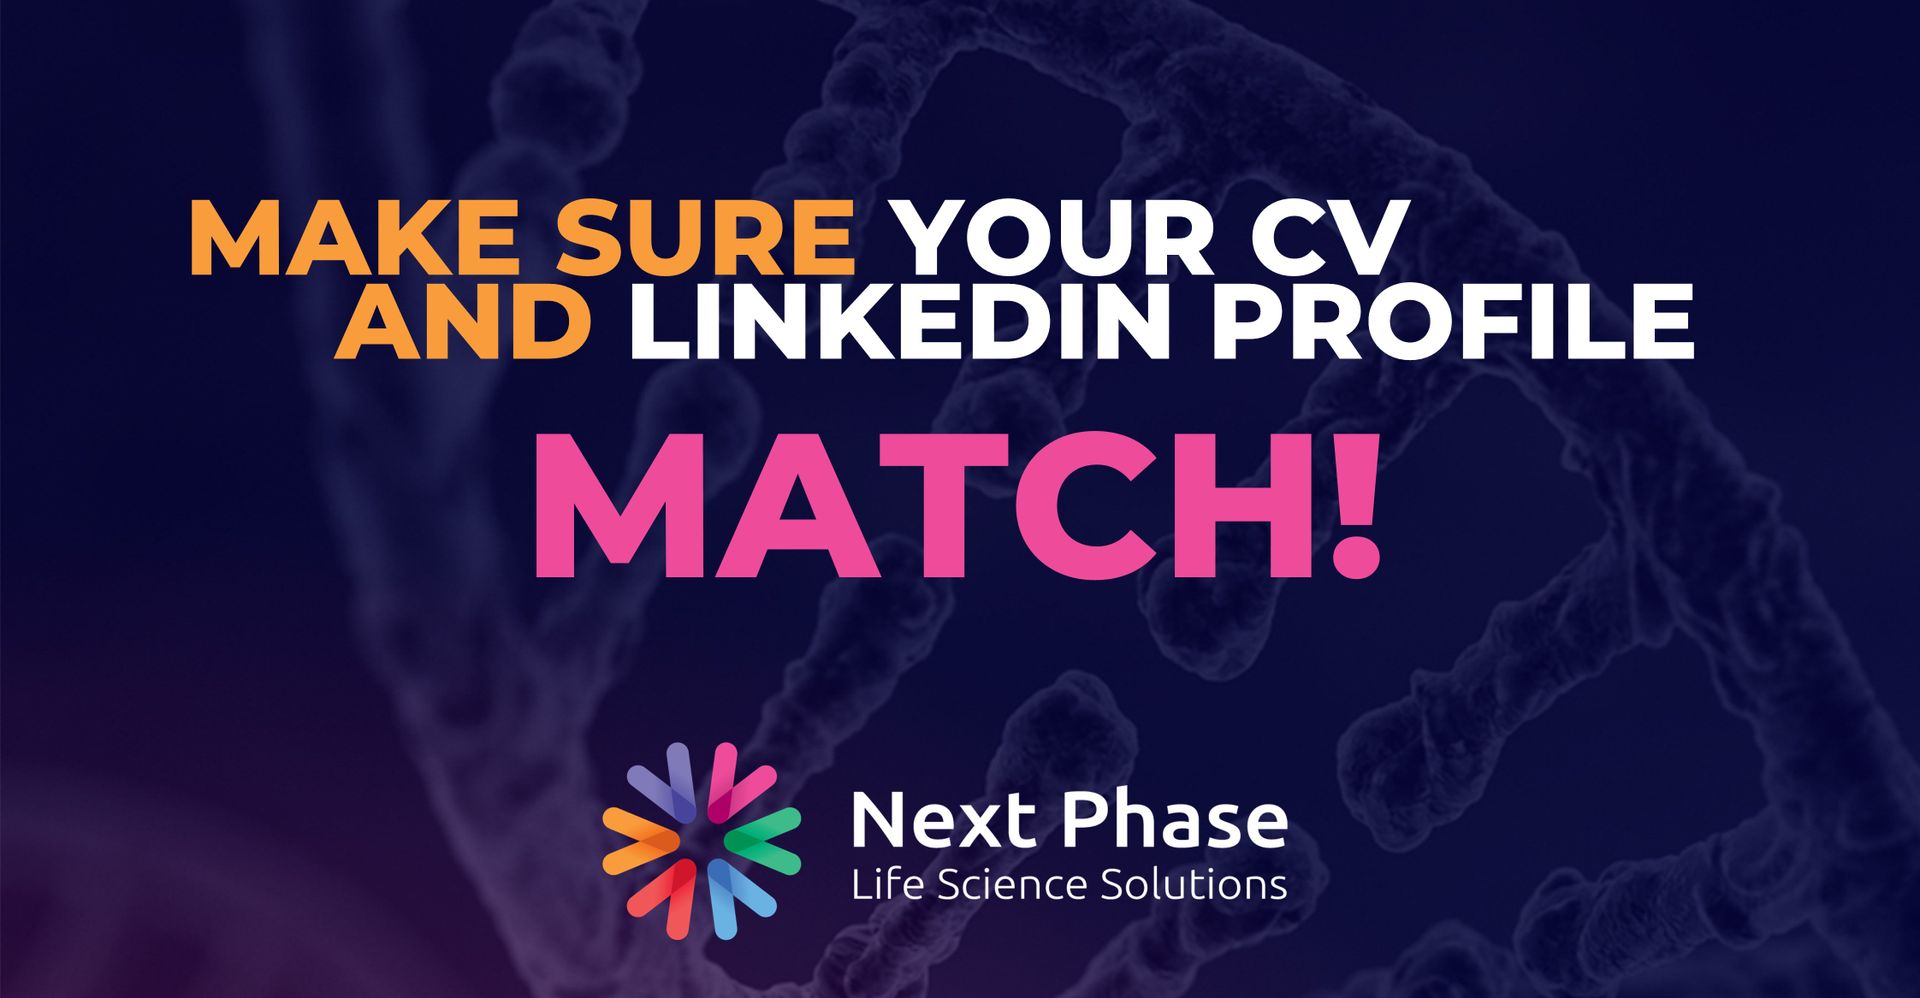 Perhaps you have dusted off your CV following your mid-year review? It can be easy to forget to update both your LinkedIn profile AND your CV at the same time. Remember that prospective employers are likely to look at both your LinkedIn profile and your new CV, so please go through both alongside each other, considering the points below....